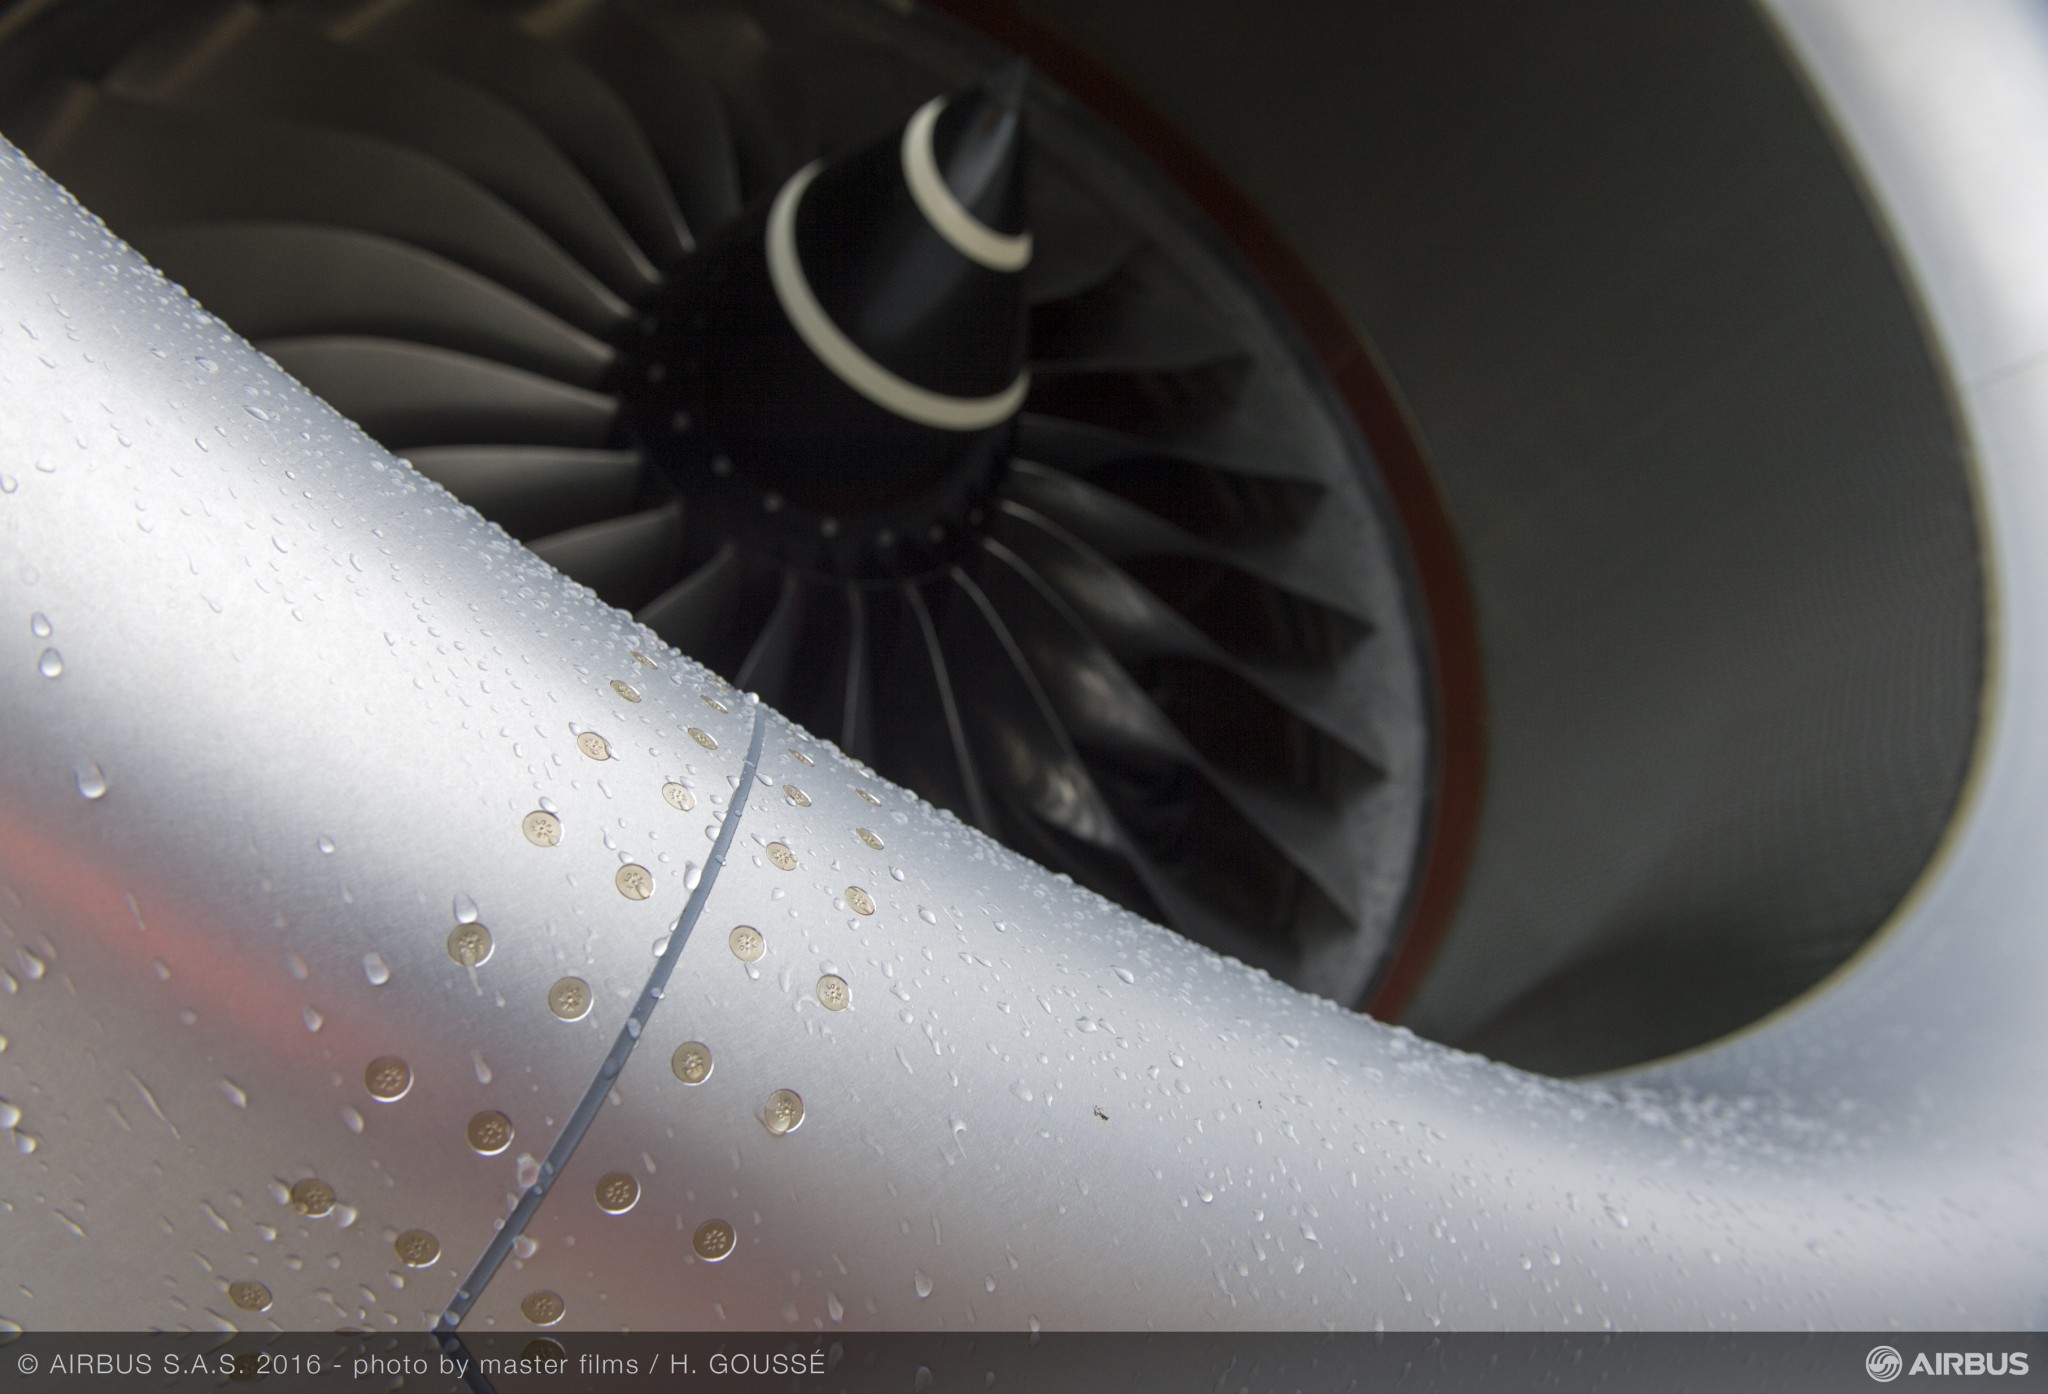 Rolls-Royce wins Selectcare order from Lufthansa for Trent engines